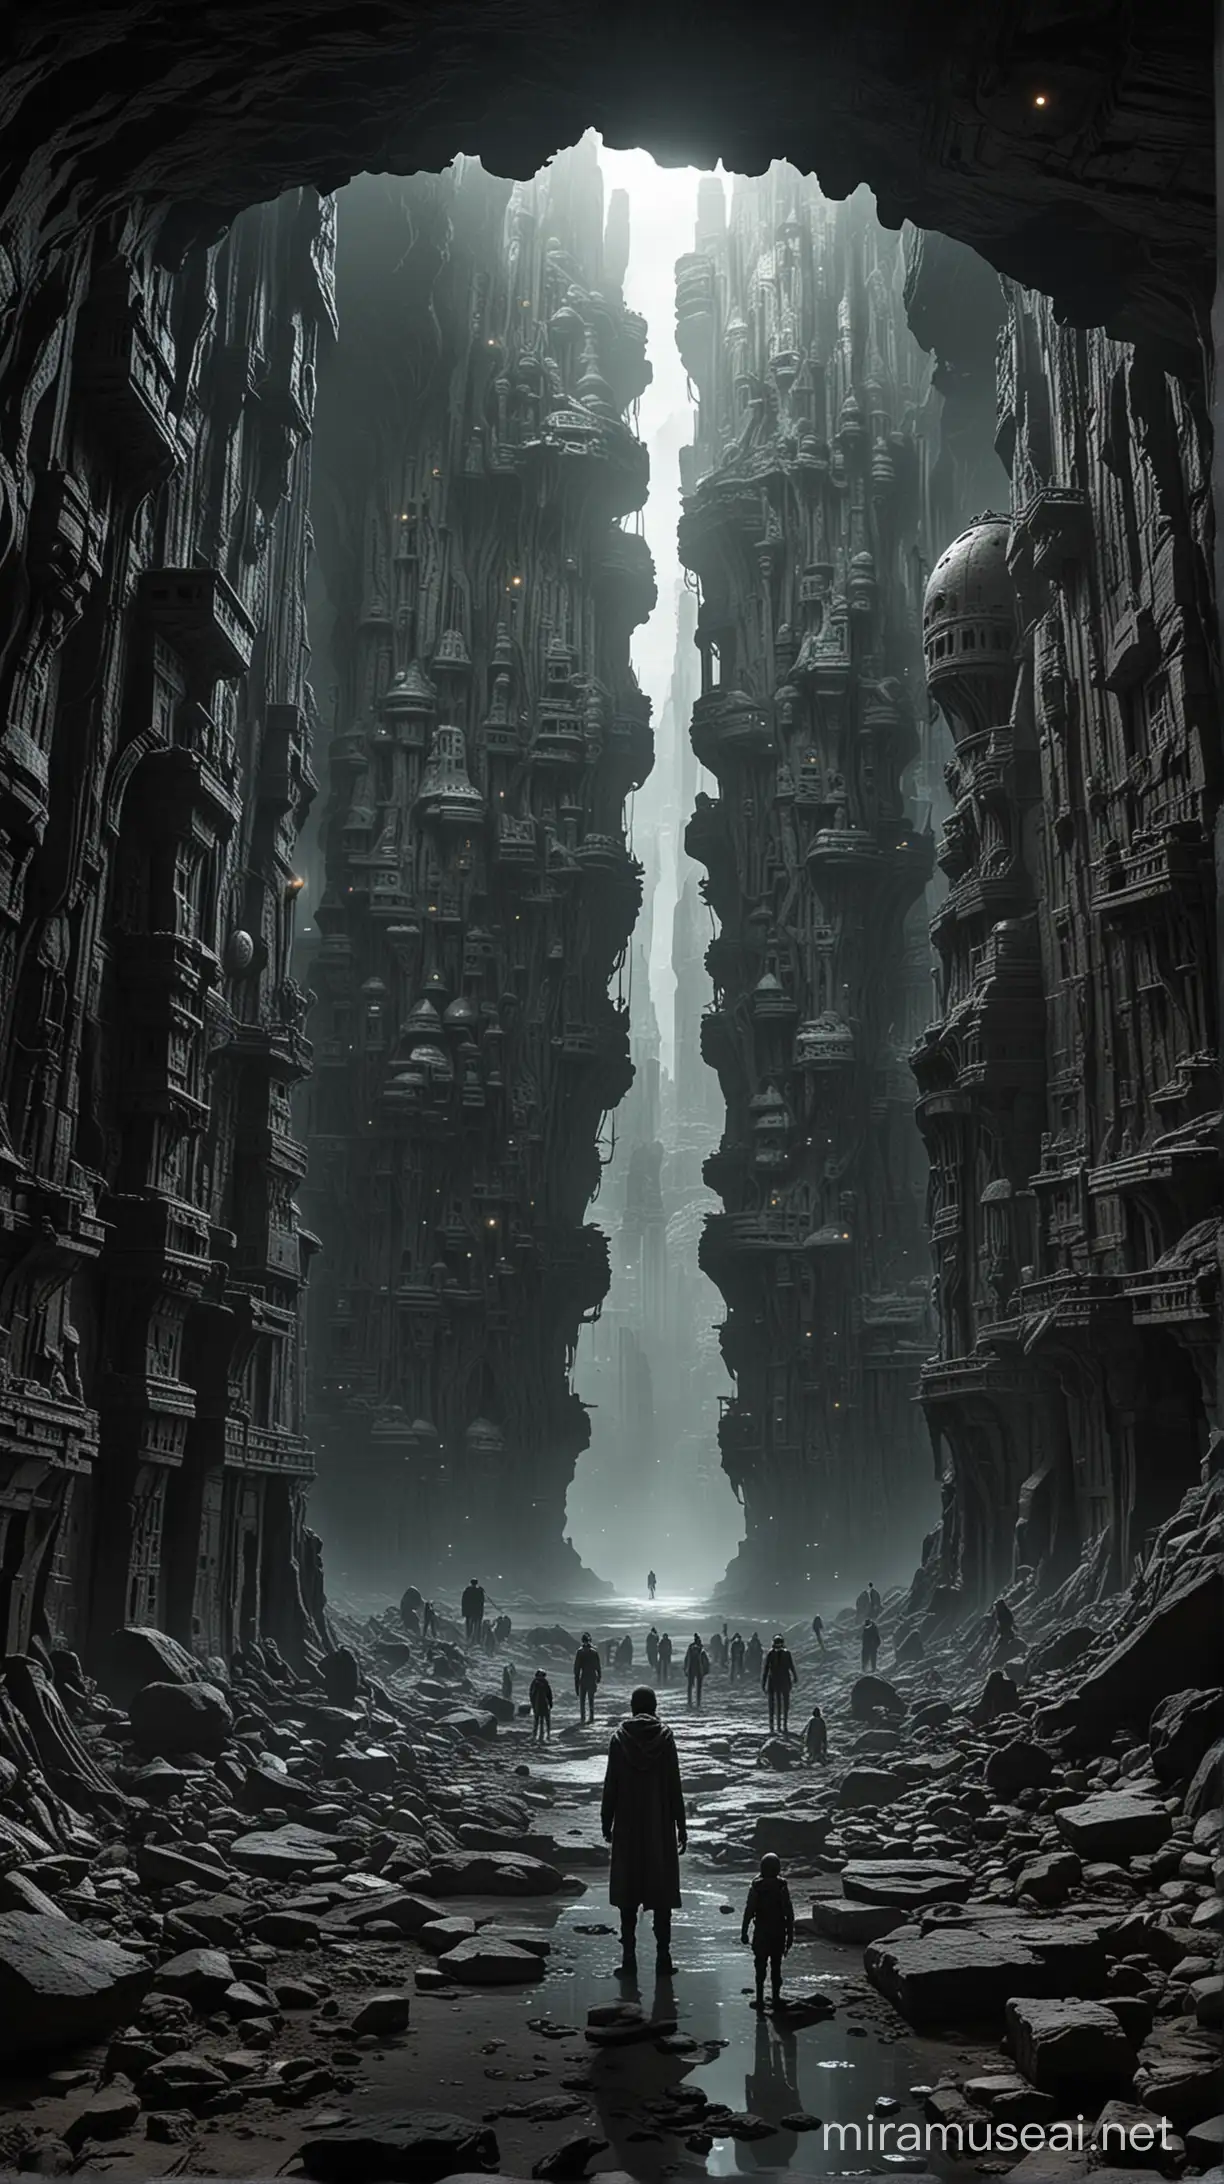 A dark and cavernous underground city, bustling with strange, humanoid figures.  In the foreground, a human stands in awe, dwarfed by the alien architecture